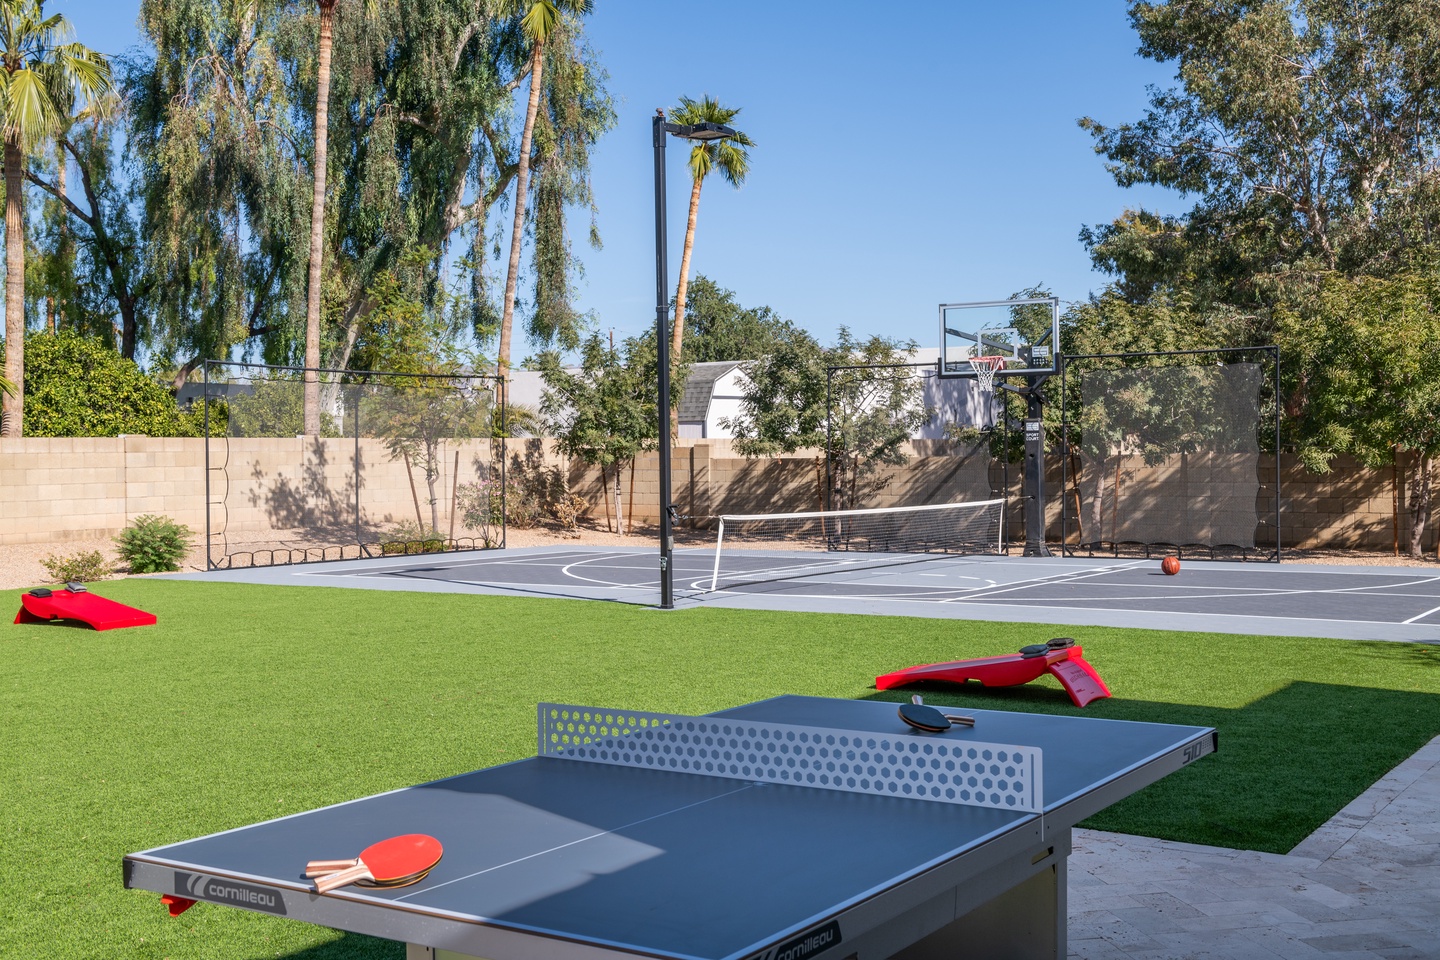 Pickle-ball, Ping Pong and more!